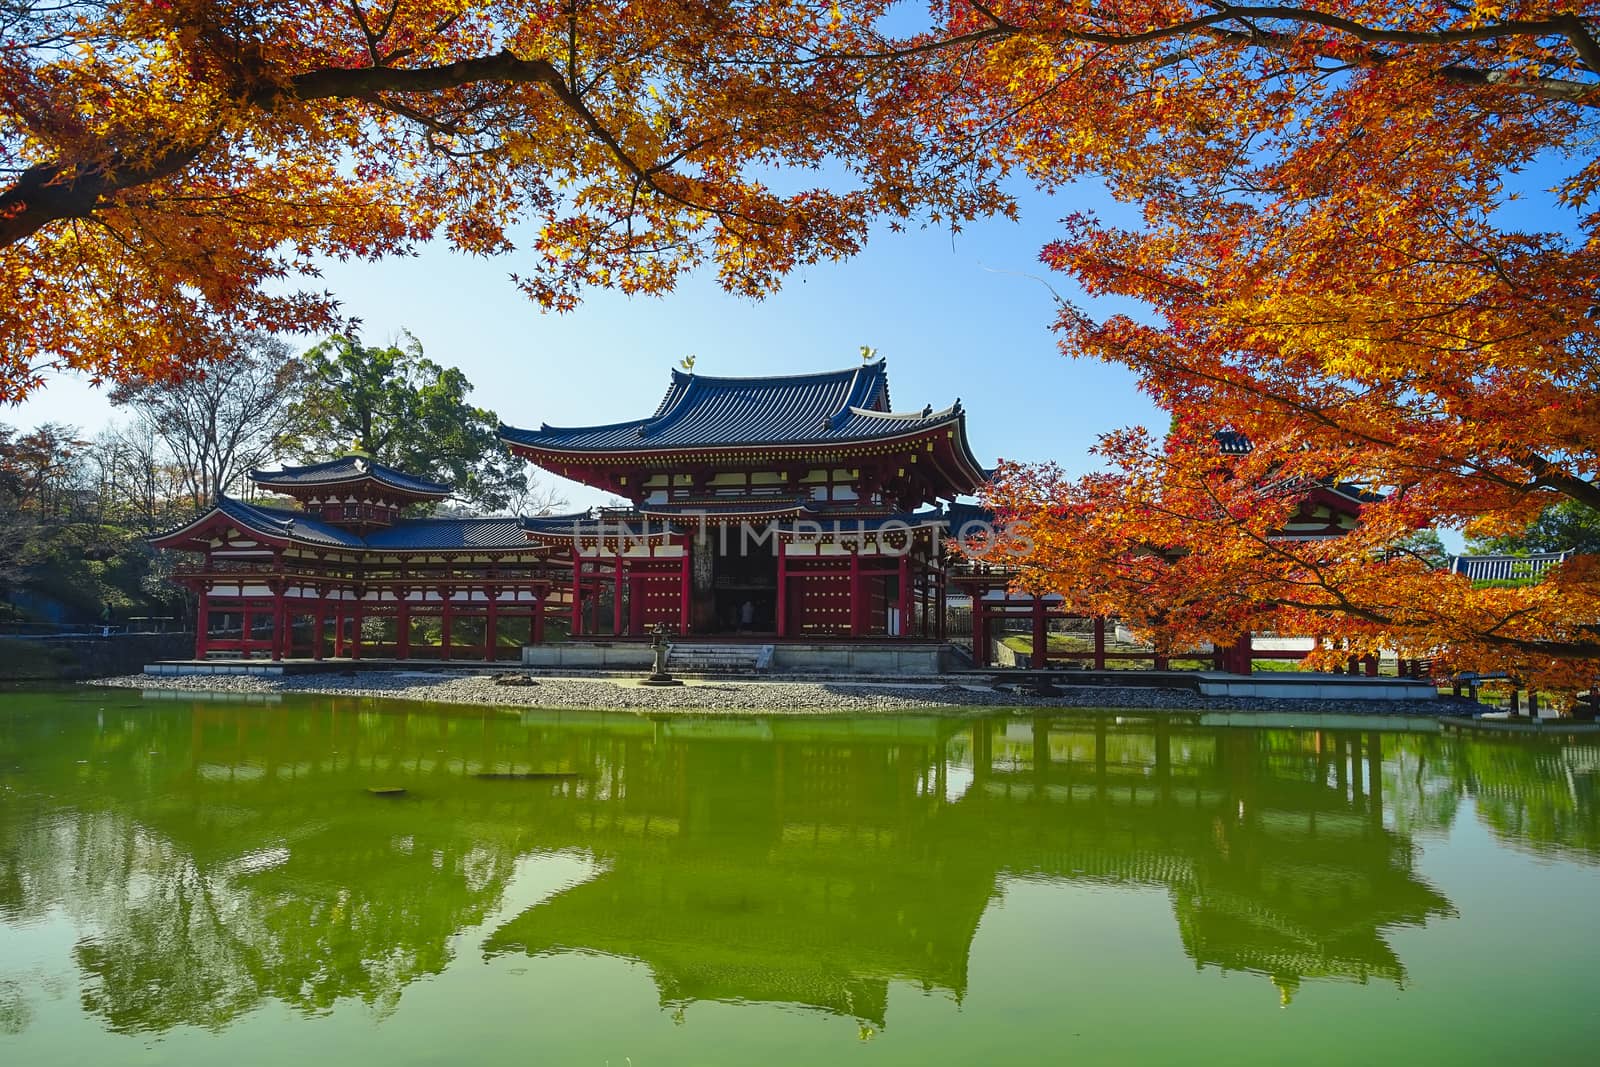 The famous Phoenix Hall or Hoodo Hall in Byodoin(Byodo-in) temple in Uji City, Kyoto, Japan.